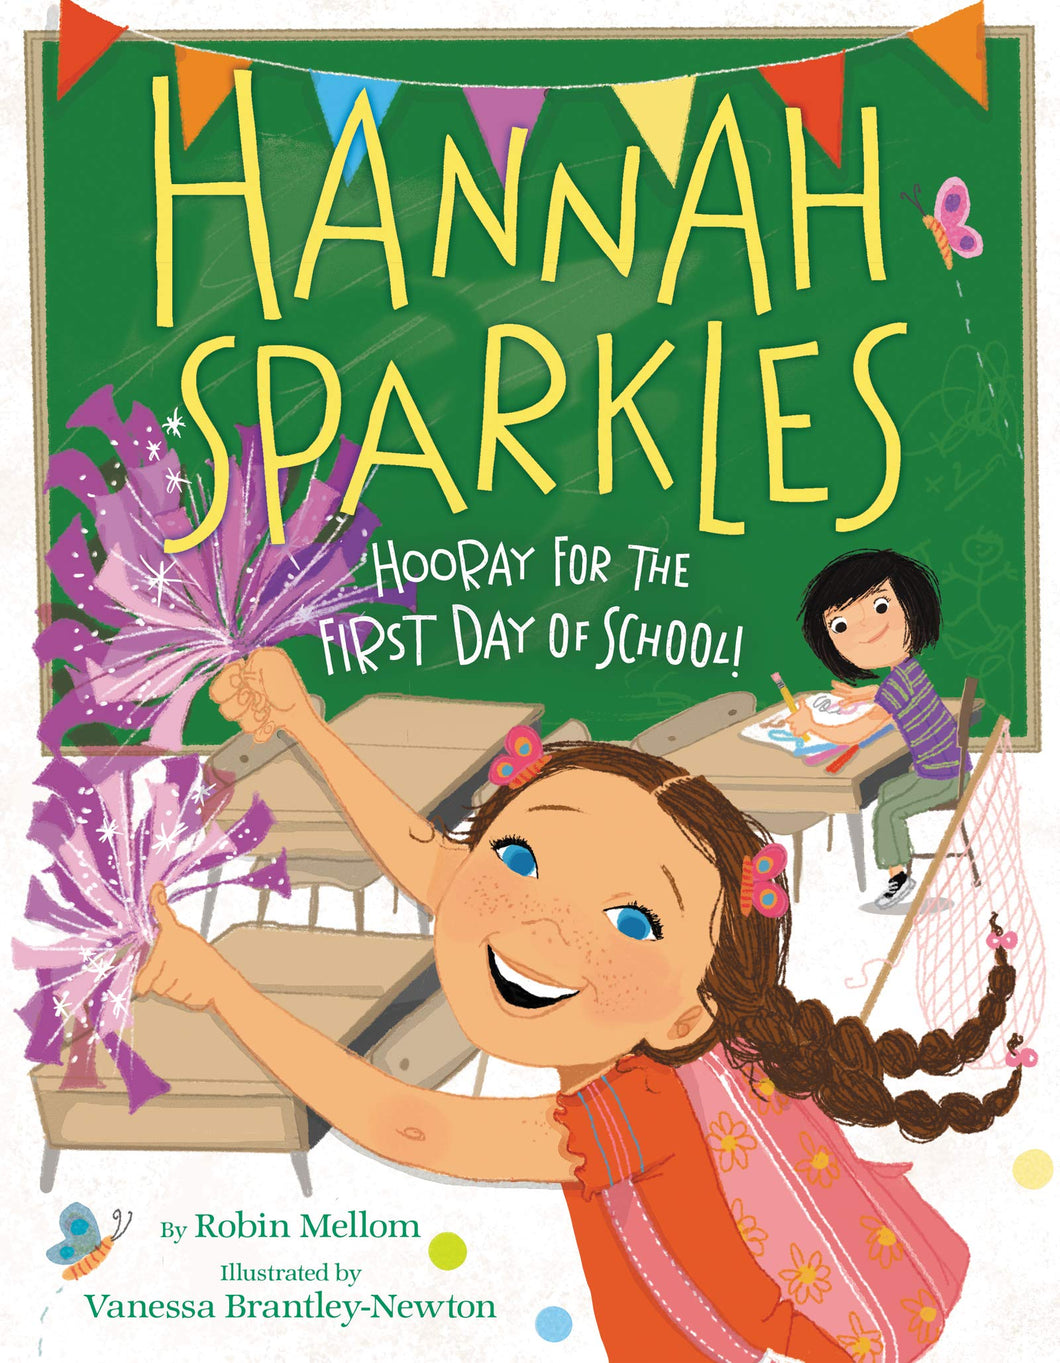 Hannah Sparkles - Hooray for the First Day of School!